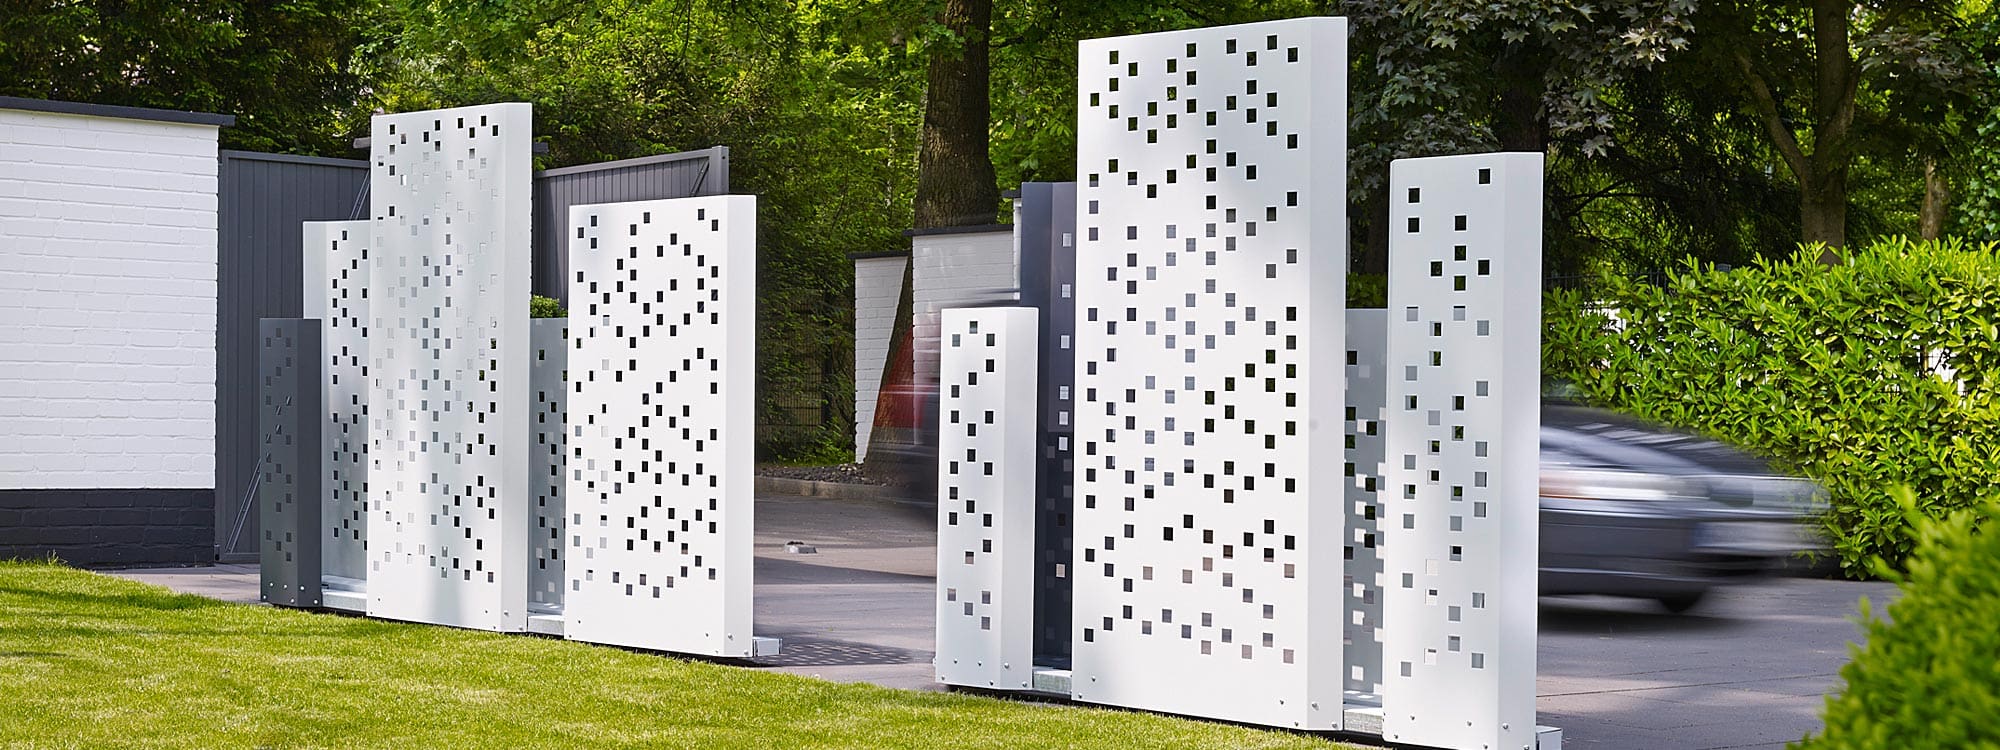 Image of Separo white geometric outdoor screens by Flora, shown in range of different sizes